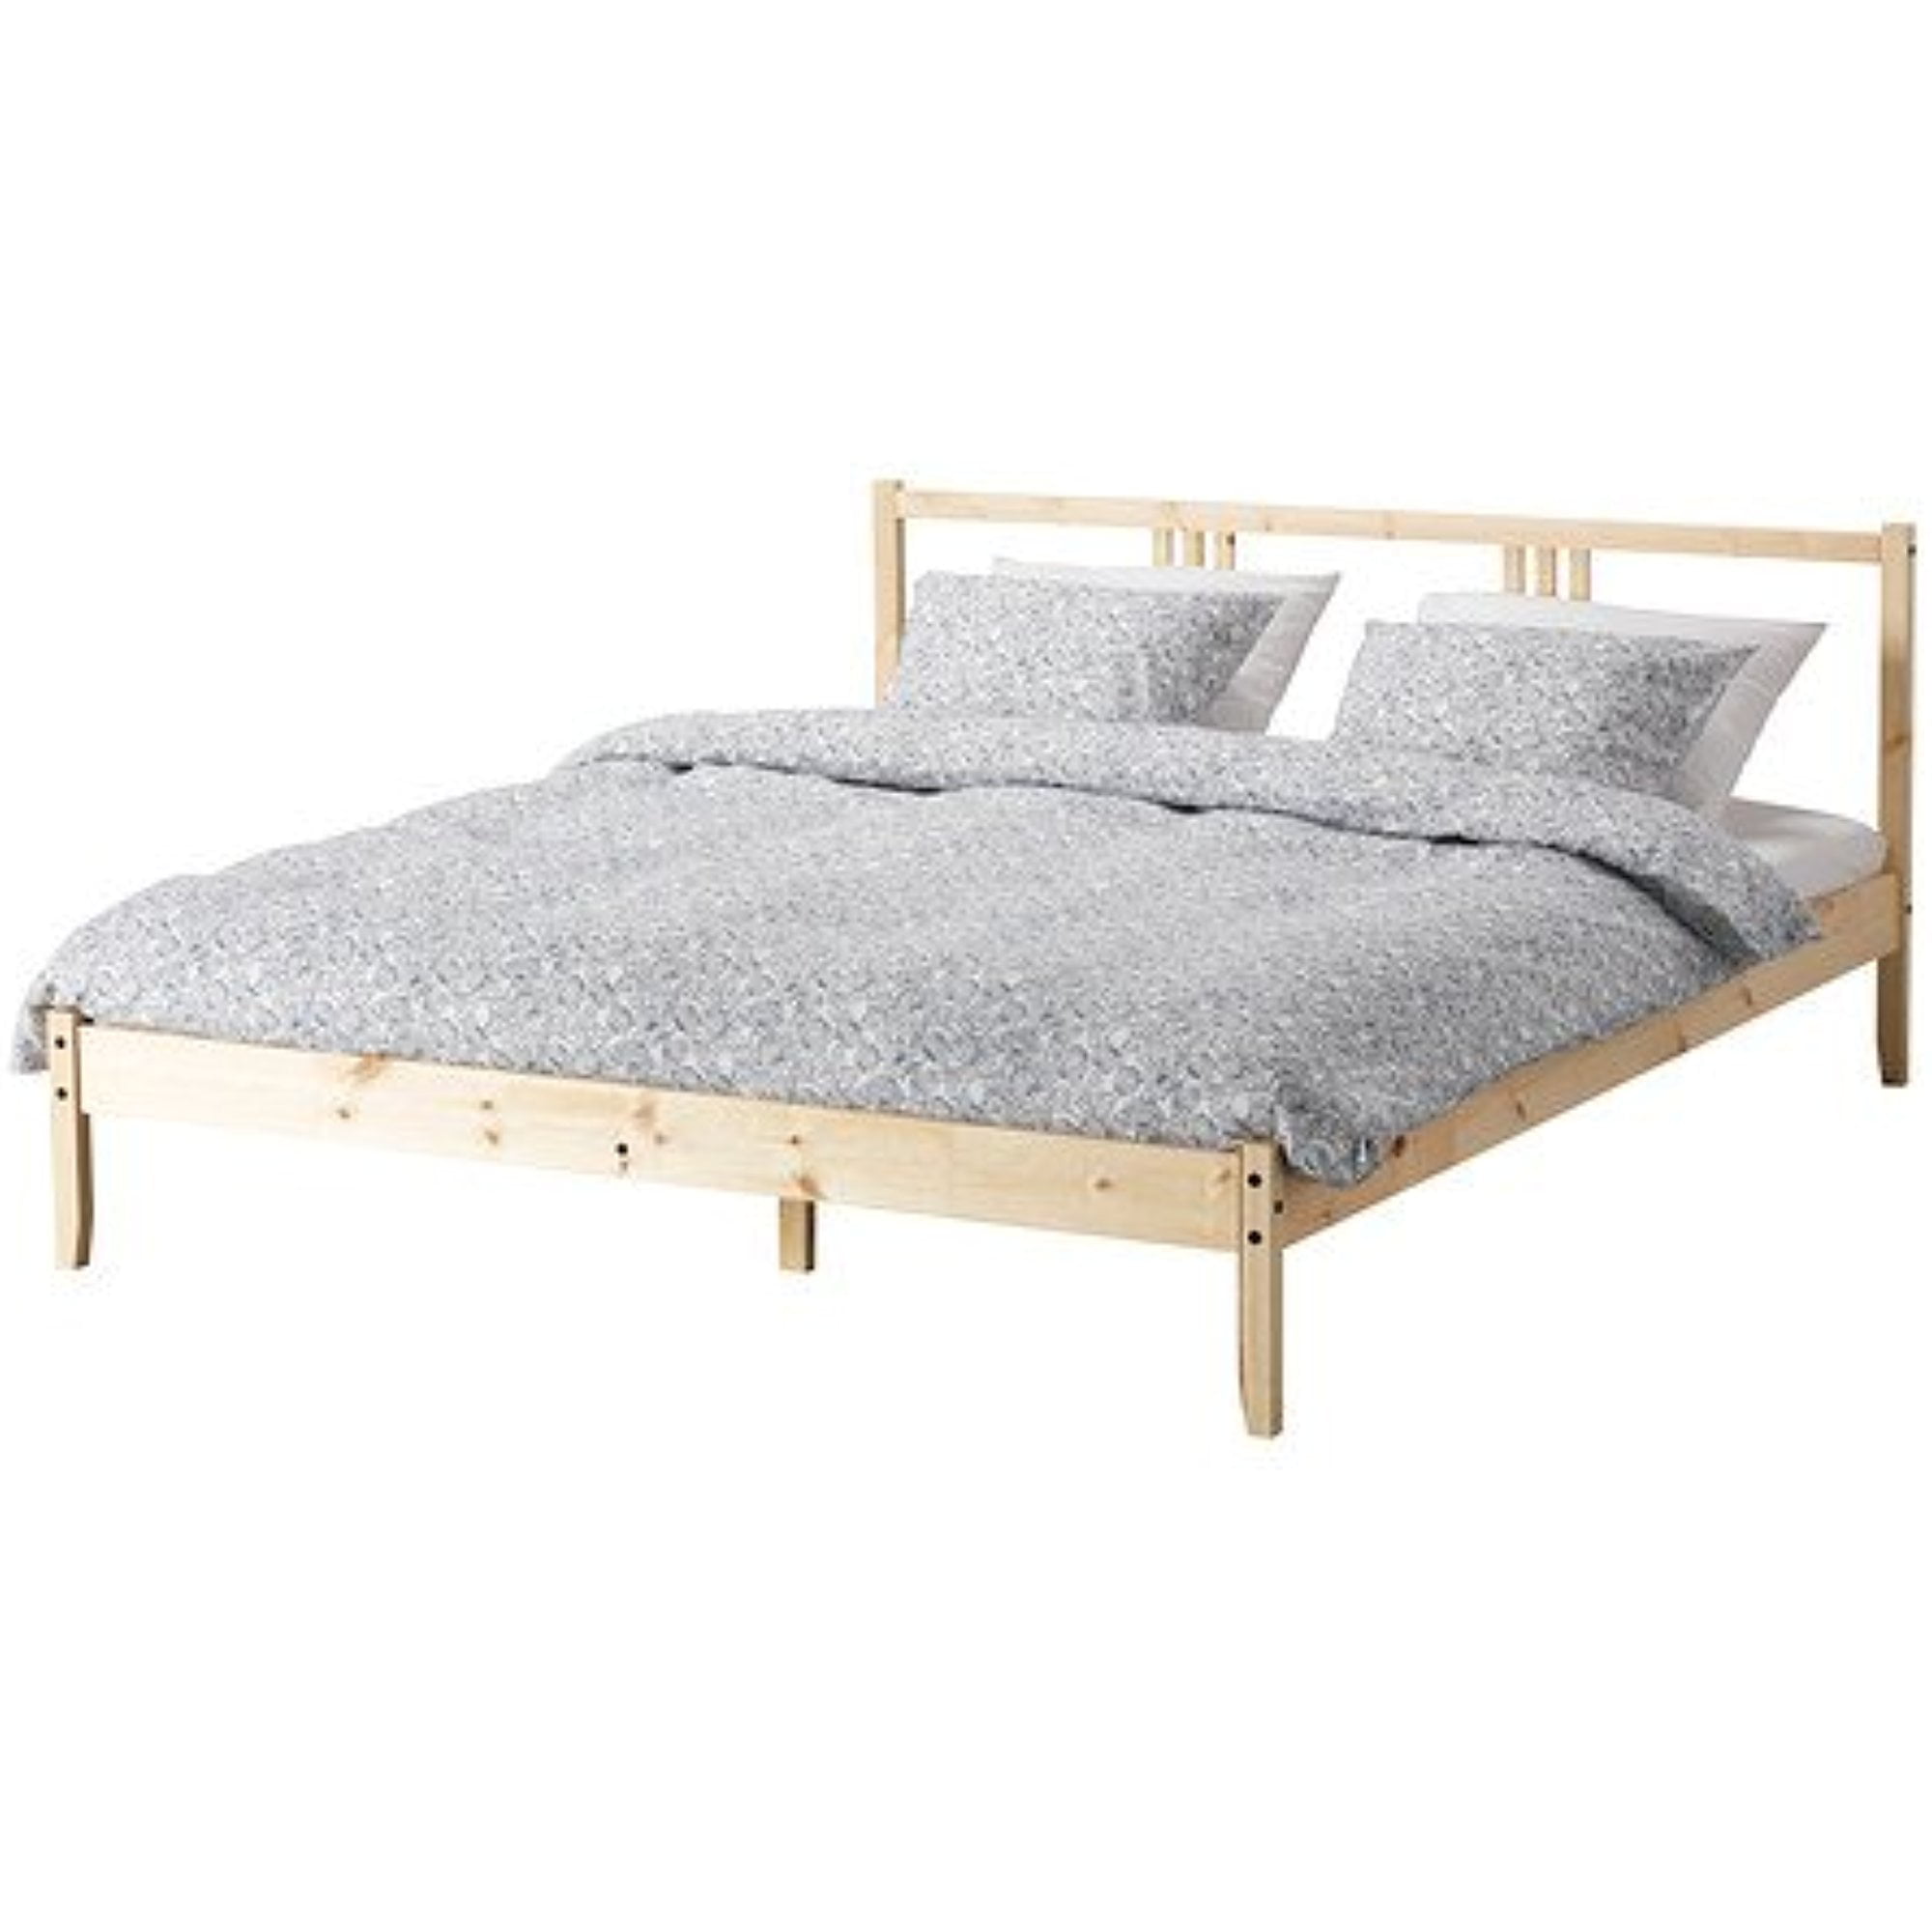 Ikea Full Size Bed Frame Solid Wood, White Wooden Bed Frame King Size Ikea